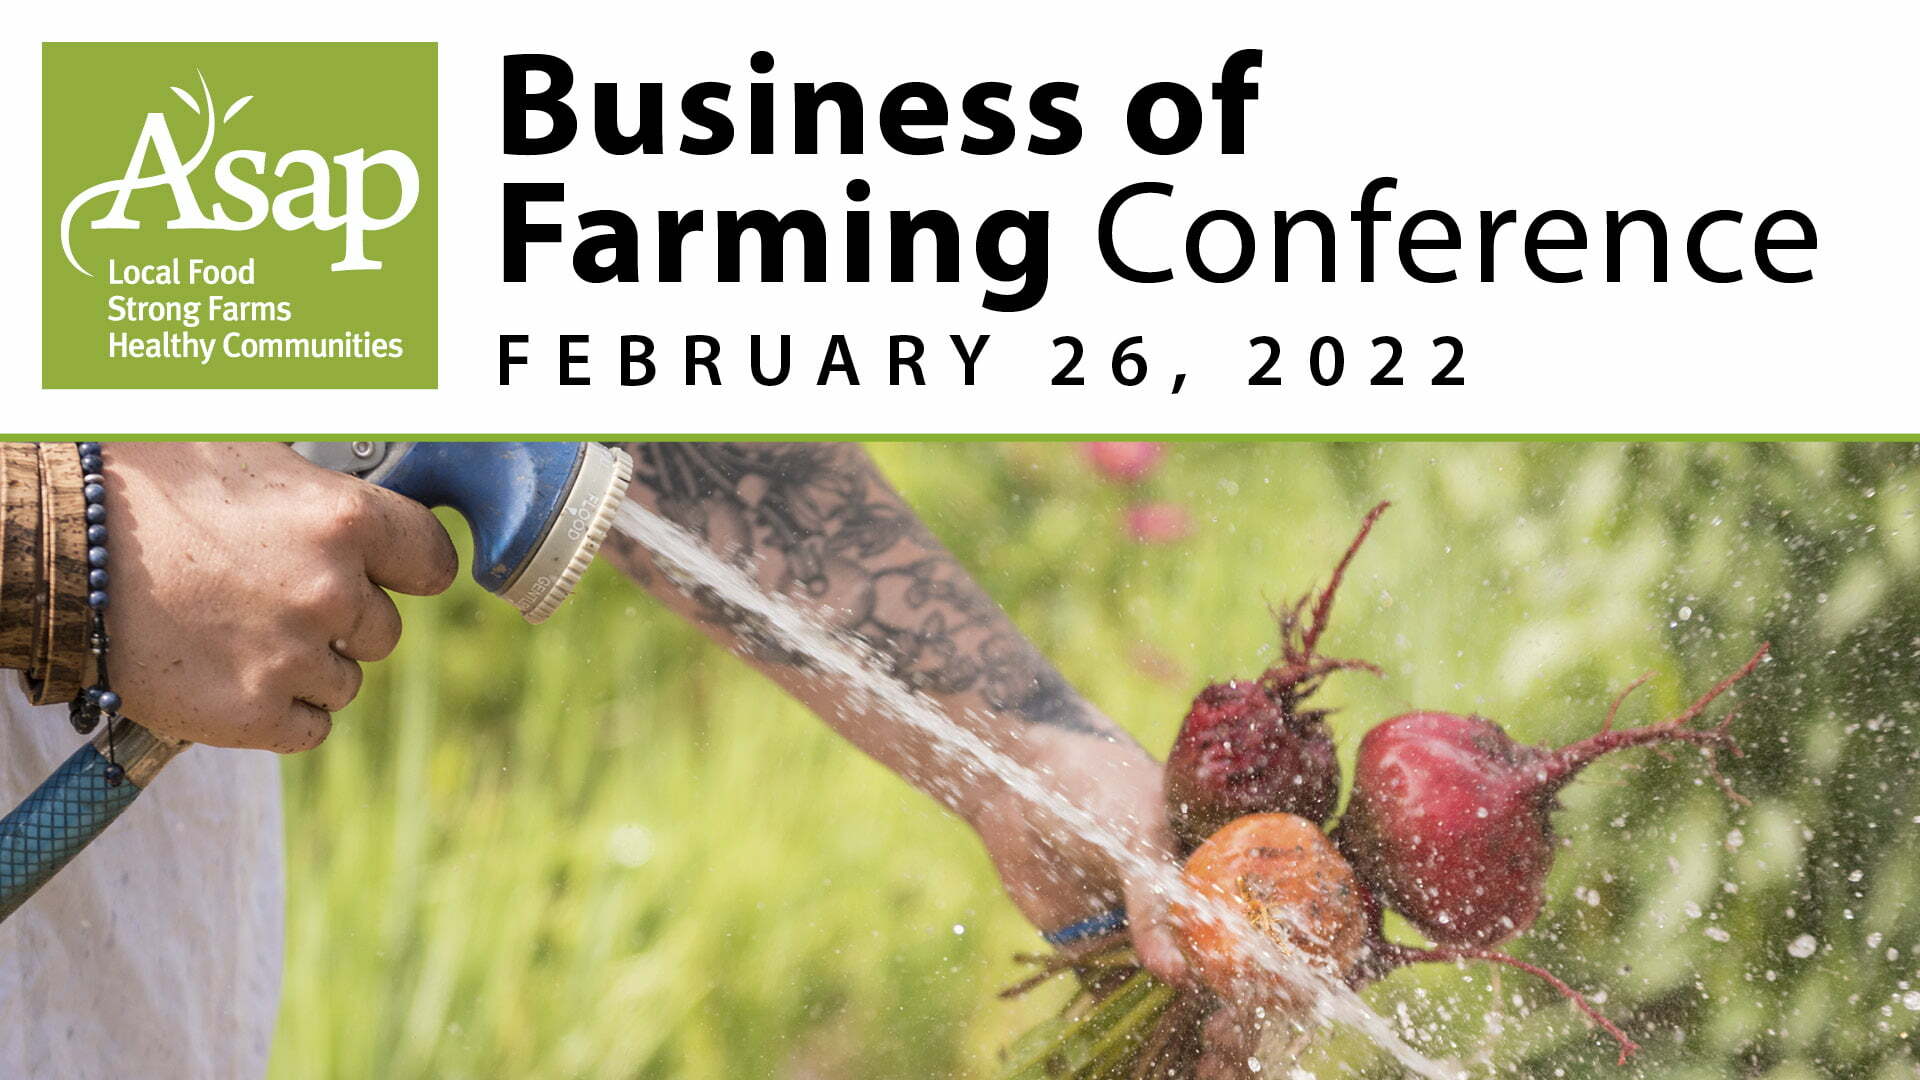 Business of Farming Conference, Feb. 26, 2022